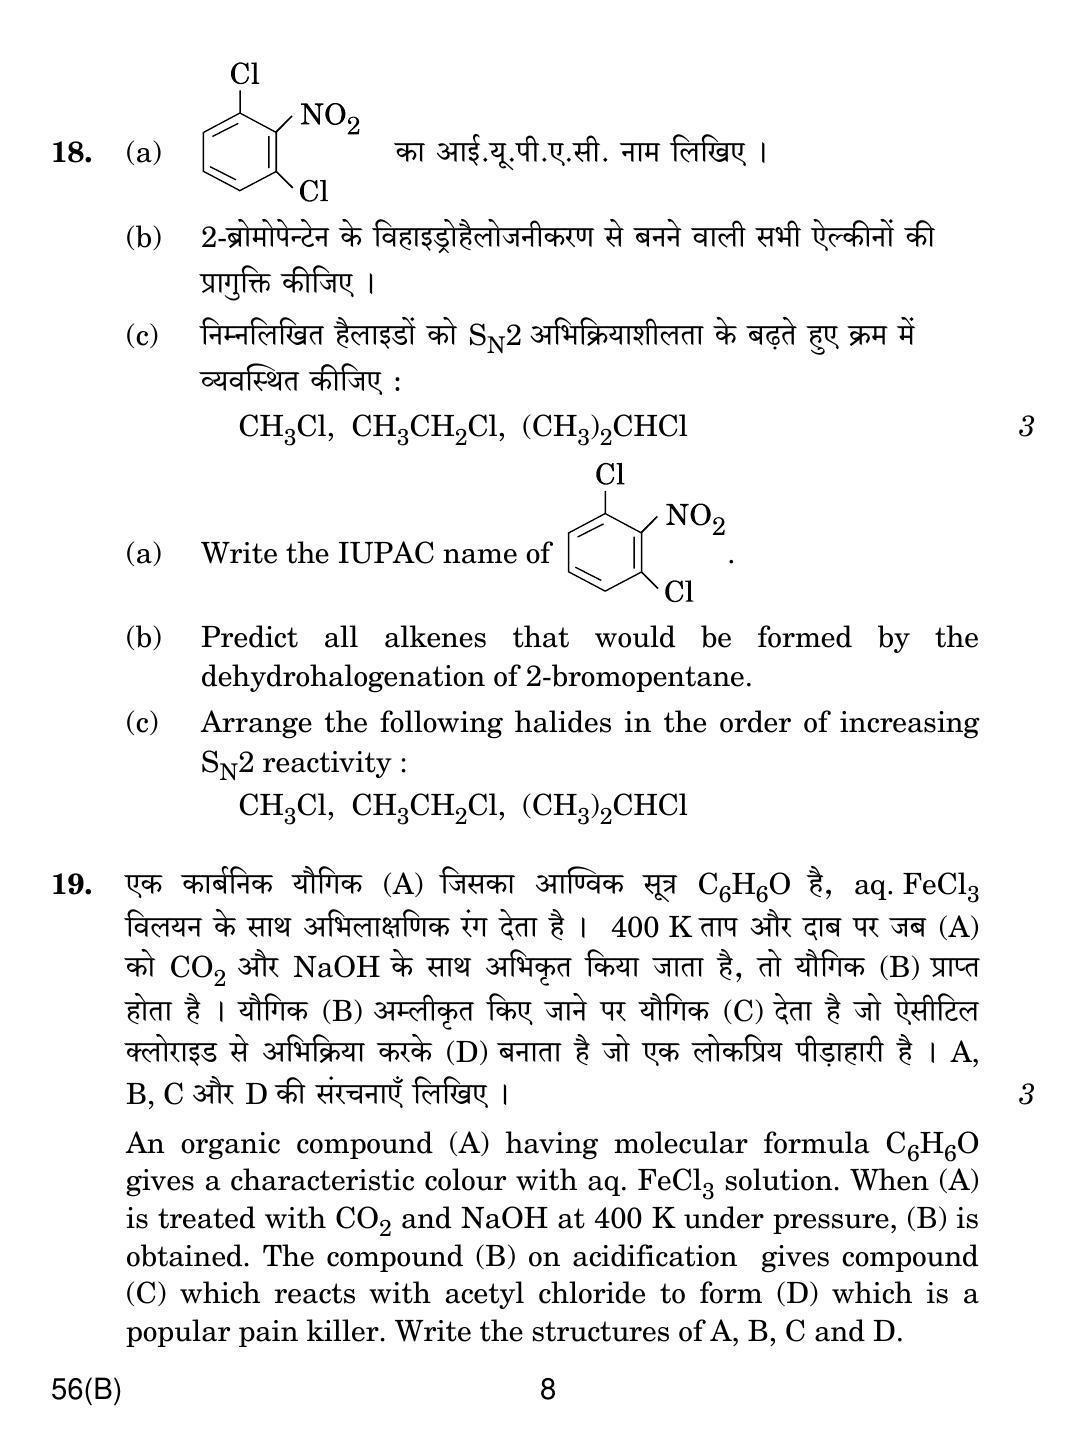 CBSE Class 12 56(B) CHEMISTRY FOR BLIND CANDIDATES 2018 Question Paper - Page 8